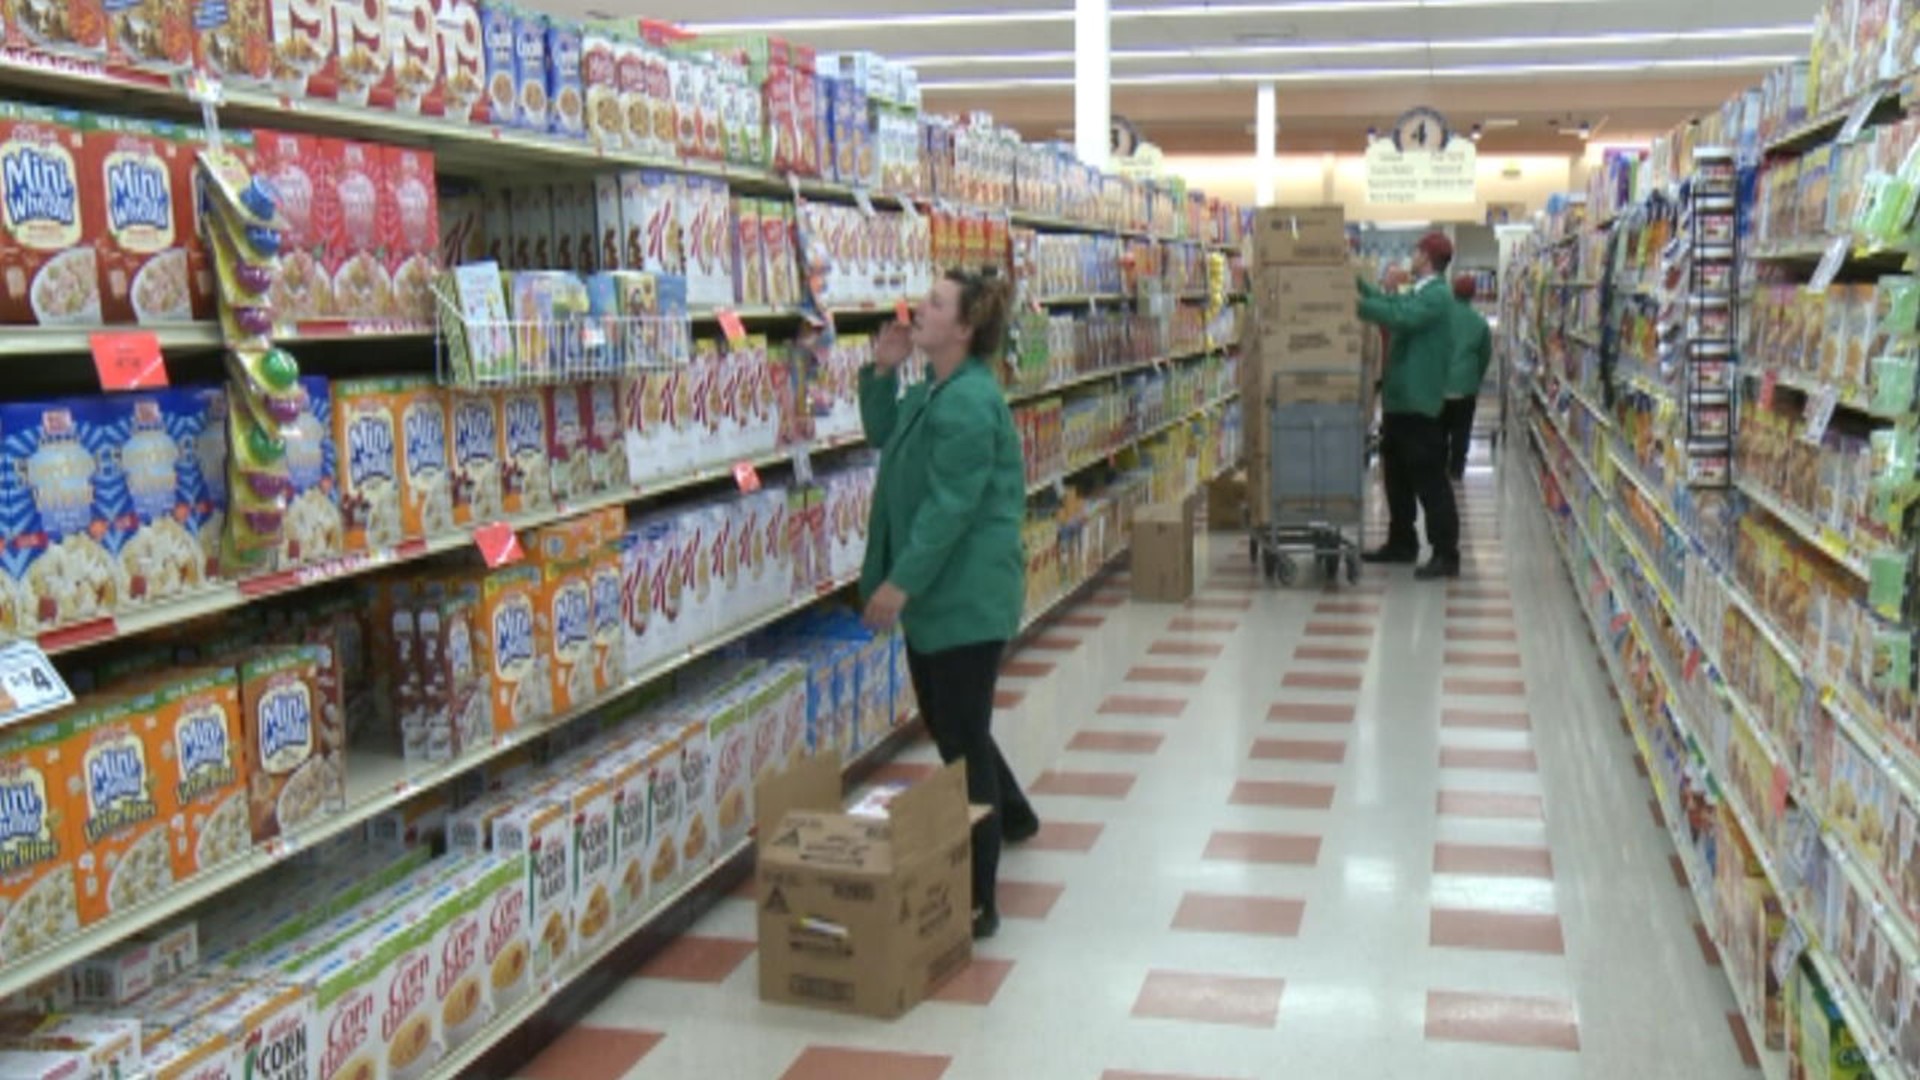 The new supermarket is expected to open in early summer. They're looking to hire 100 positions.